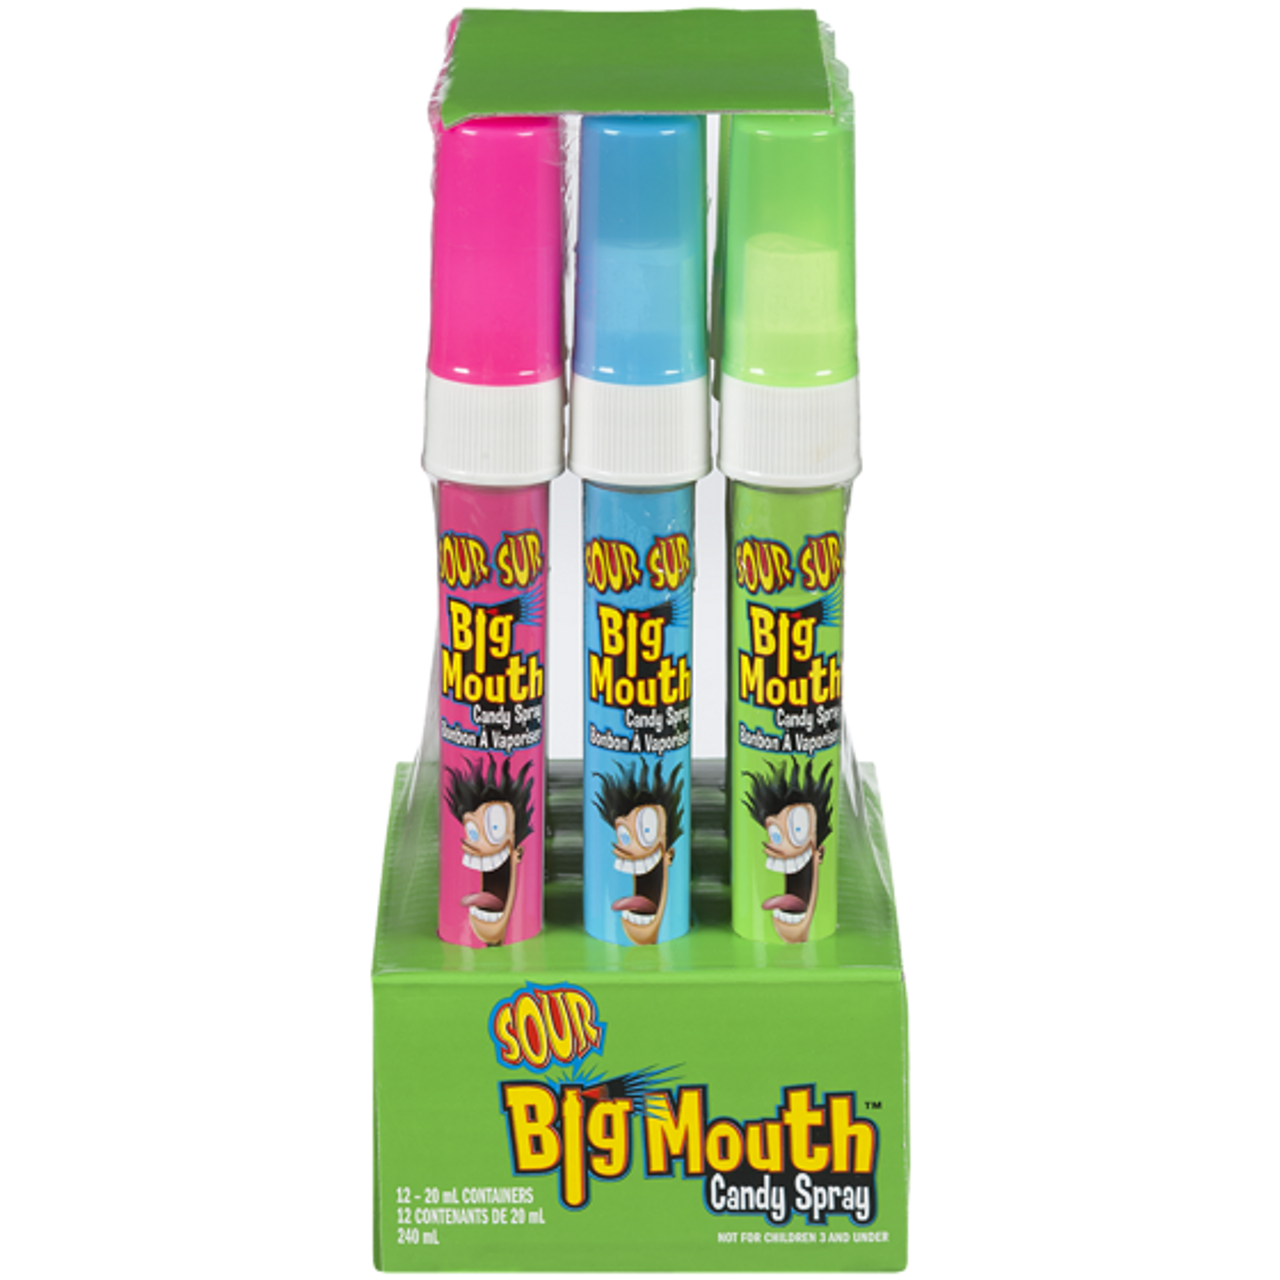 BIG MOUTH Candy Spray, Sour (Case) 12x23.0 g